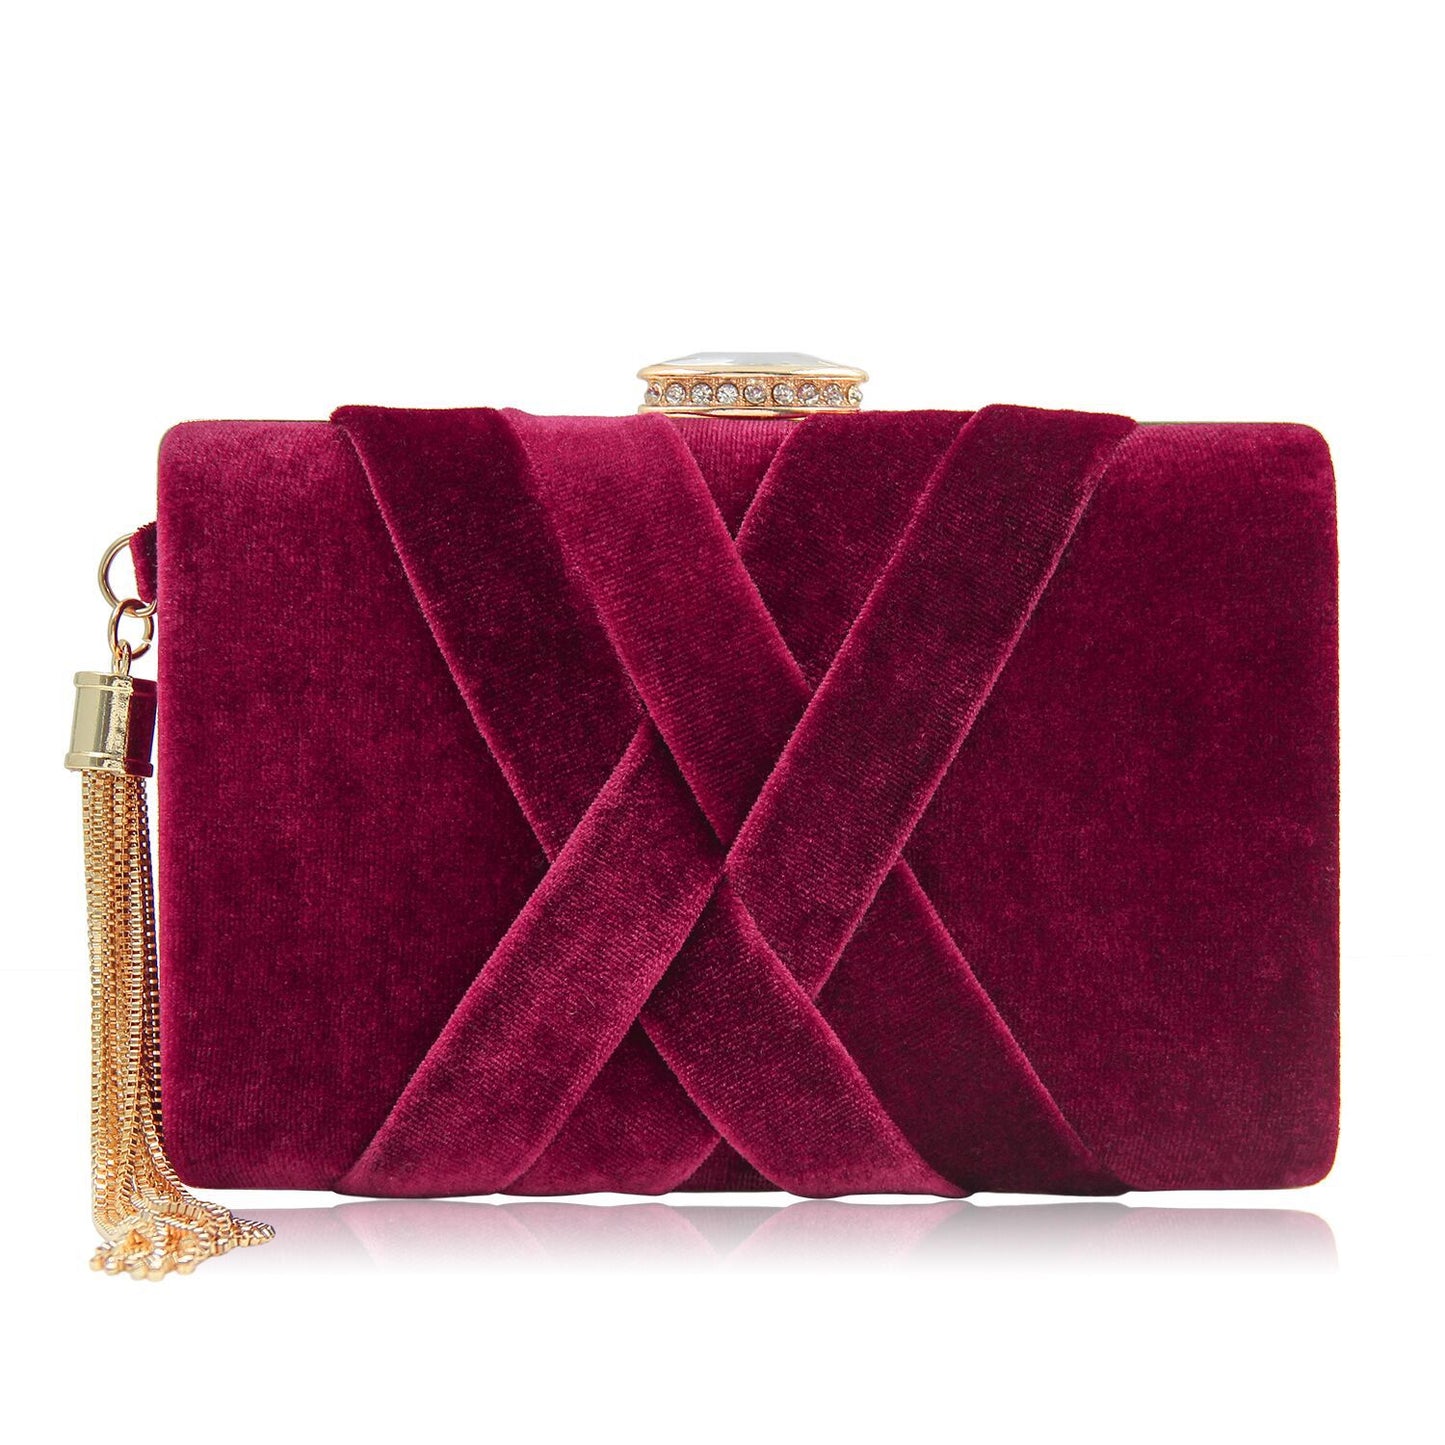 Milisente New Arrival Women Clutch Bags Top Quality Suede Clutches Purses Ladies Tassels Evening Bag Wedding Clutches